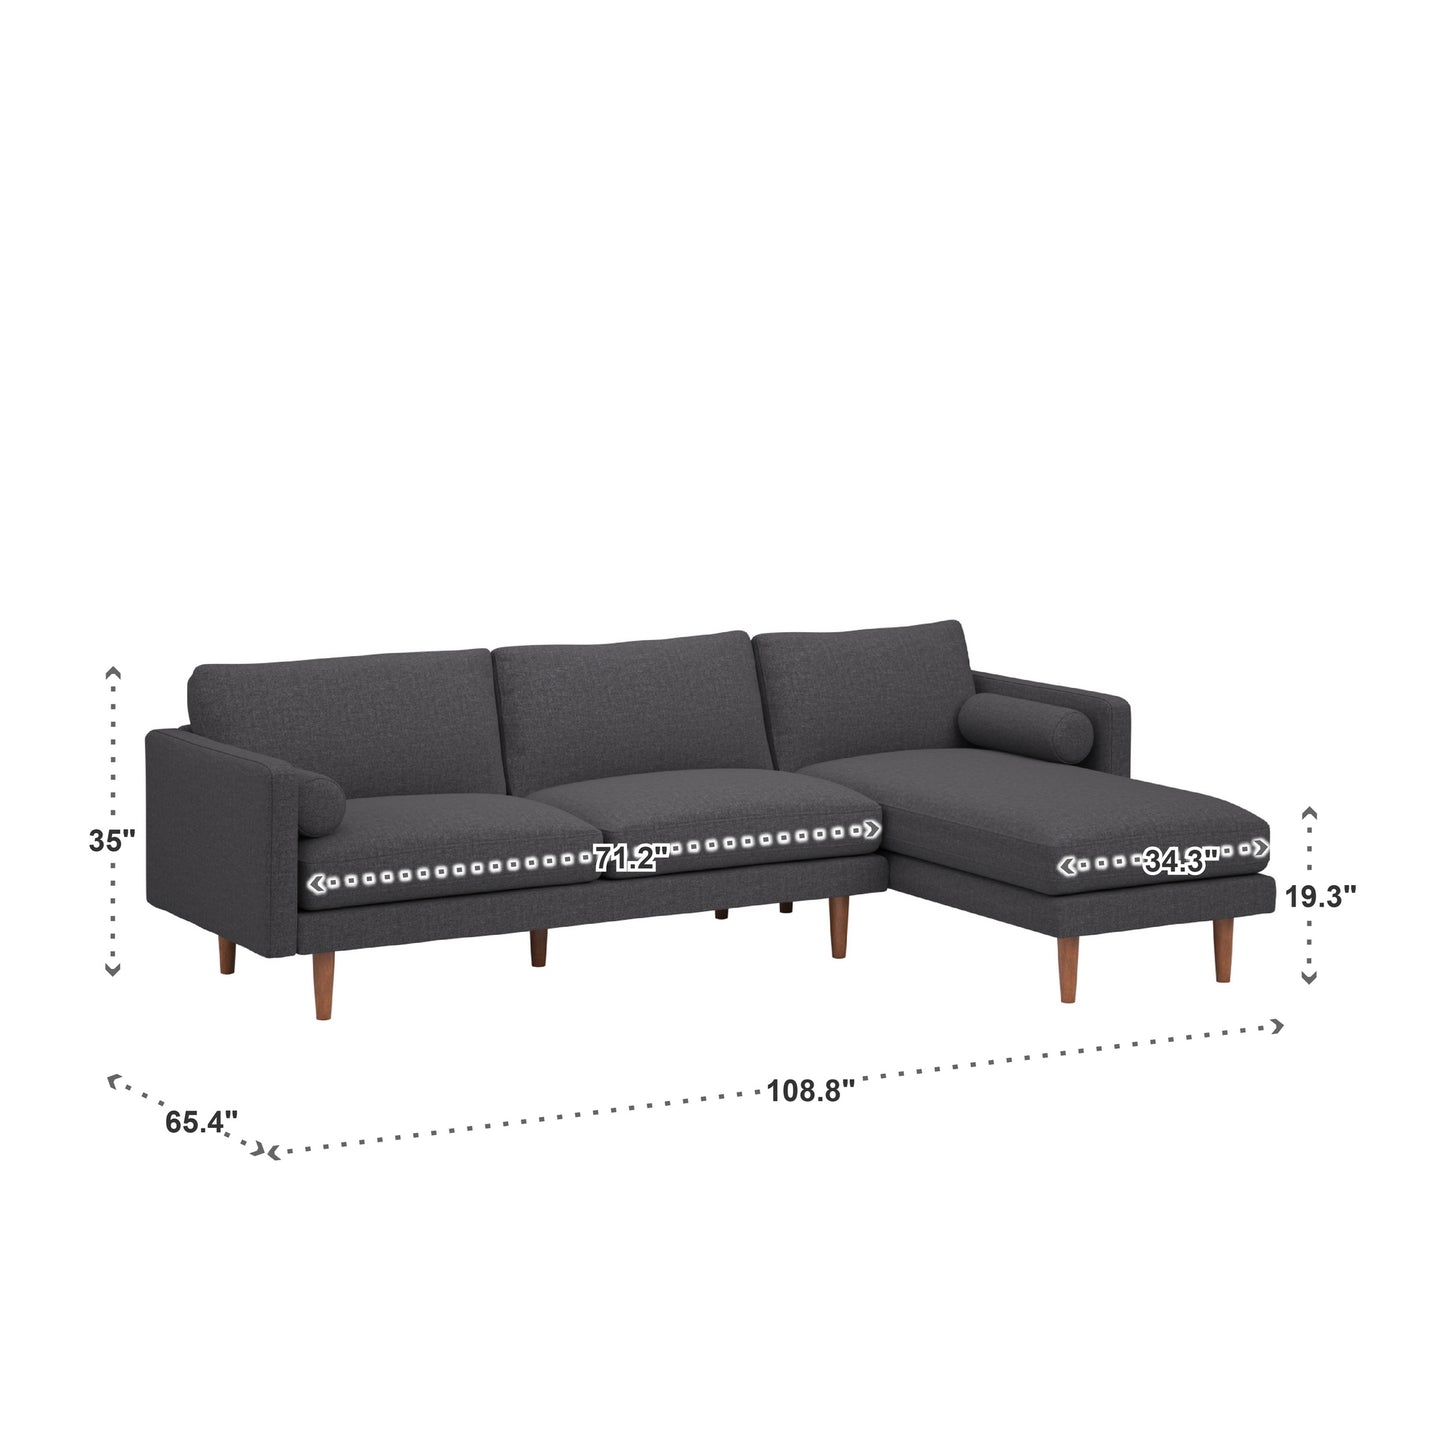 Mid-Century Upholstered Sectional Sofa - Black, 3-Seat Sectional with Right-Facing Chaise